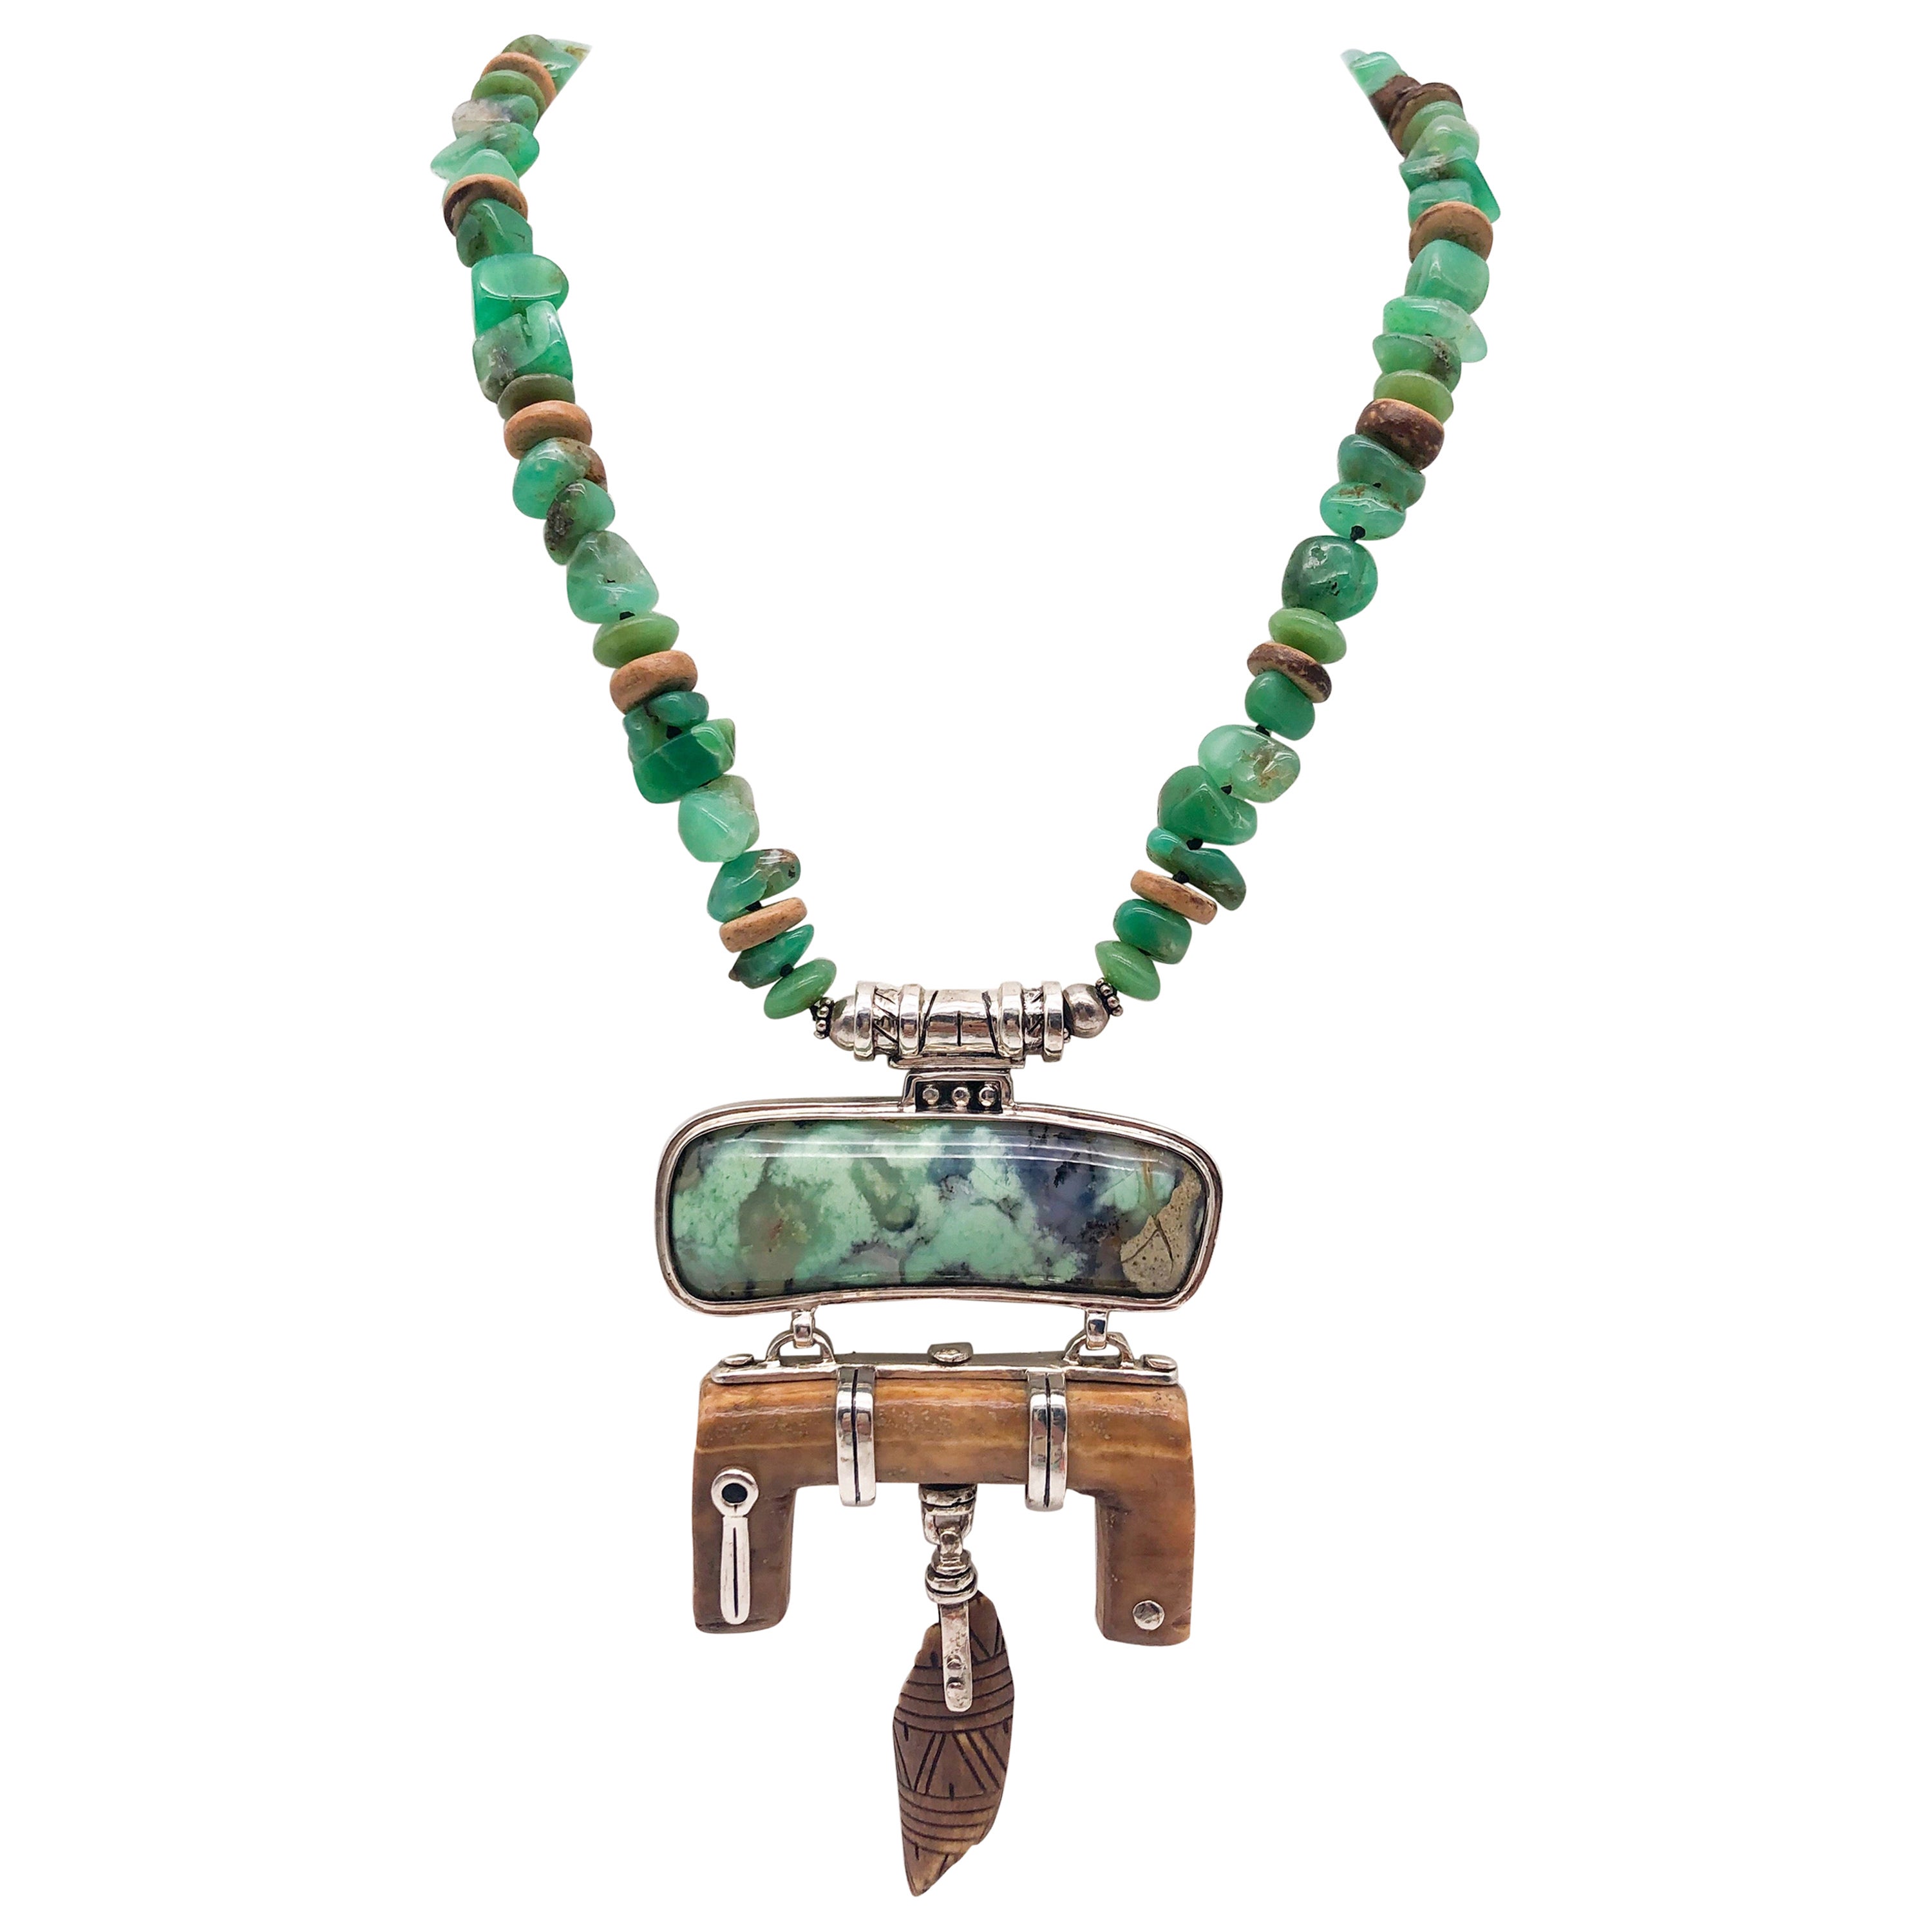 A.Jeschel Carved Fossil Pendant suspendend from a rich green Chrysoprase stones For Sale